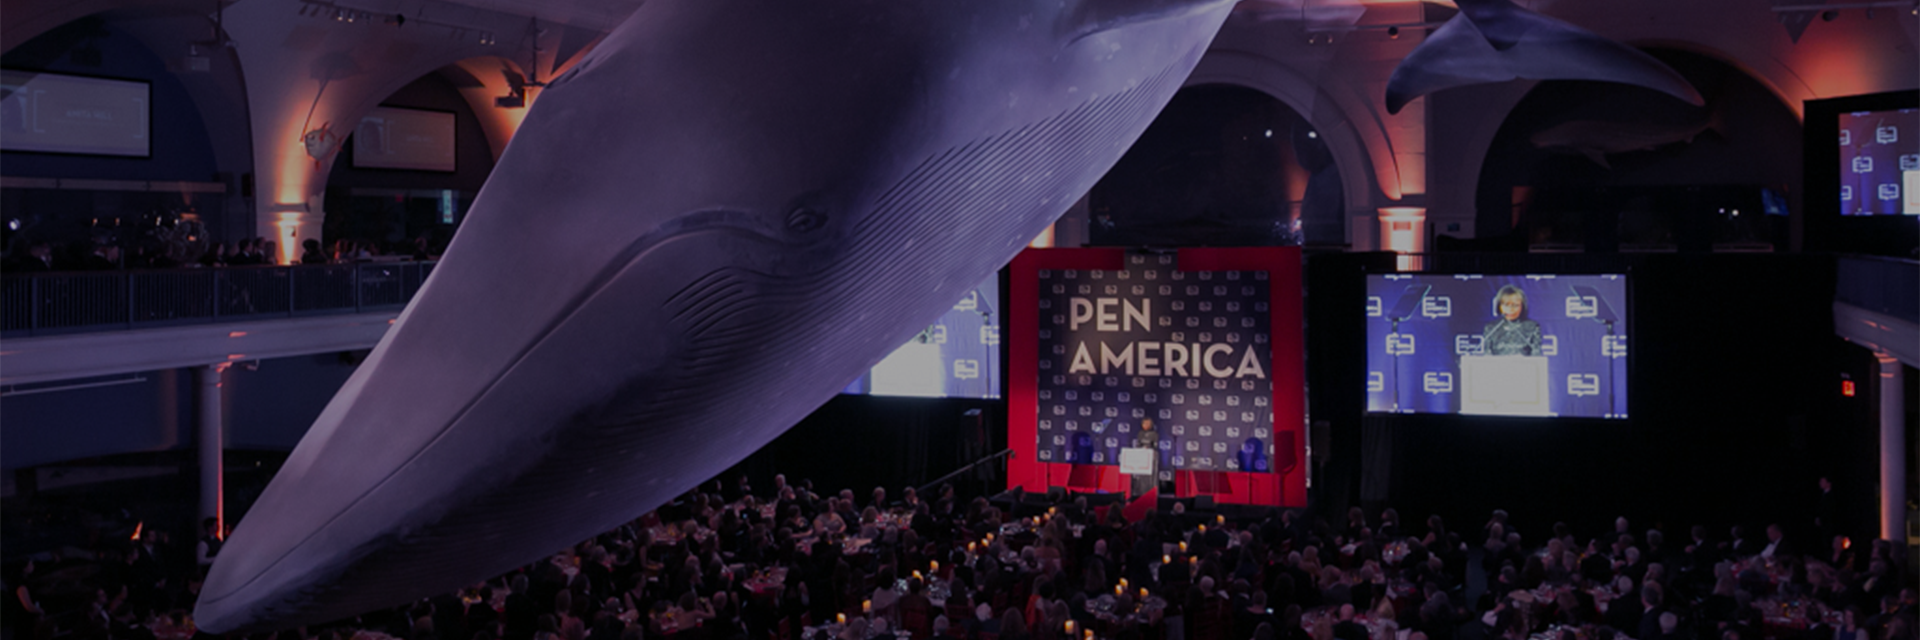 Photo from 2019 PEN America Literary Gala, with whale overhead at the American Museum of Natural History and PEN America stage/audience in the background